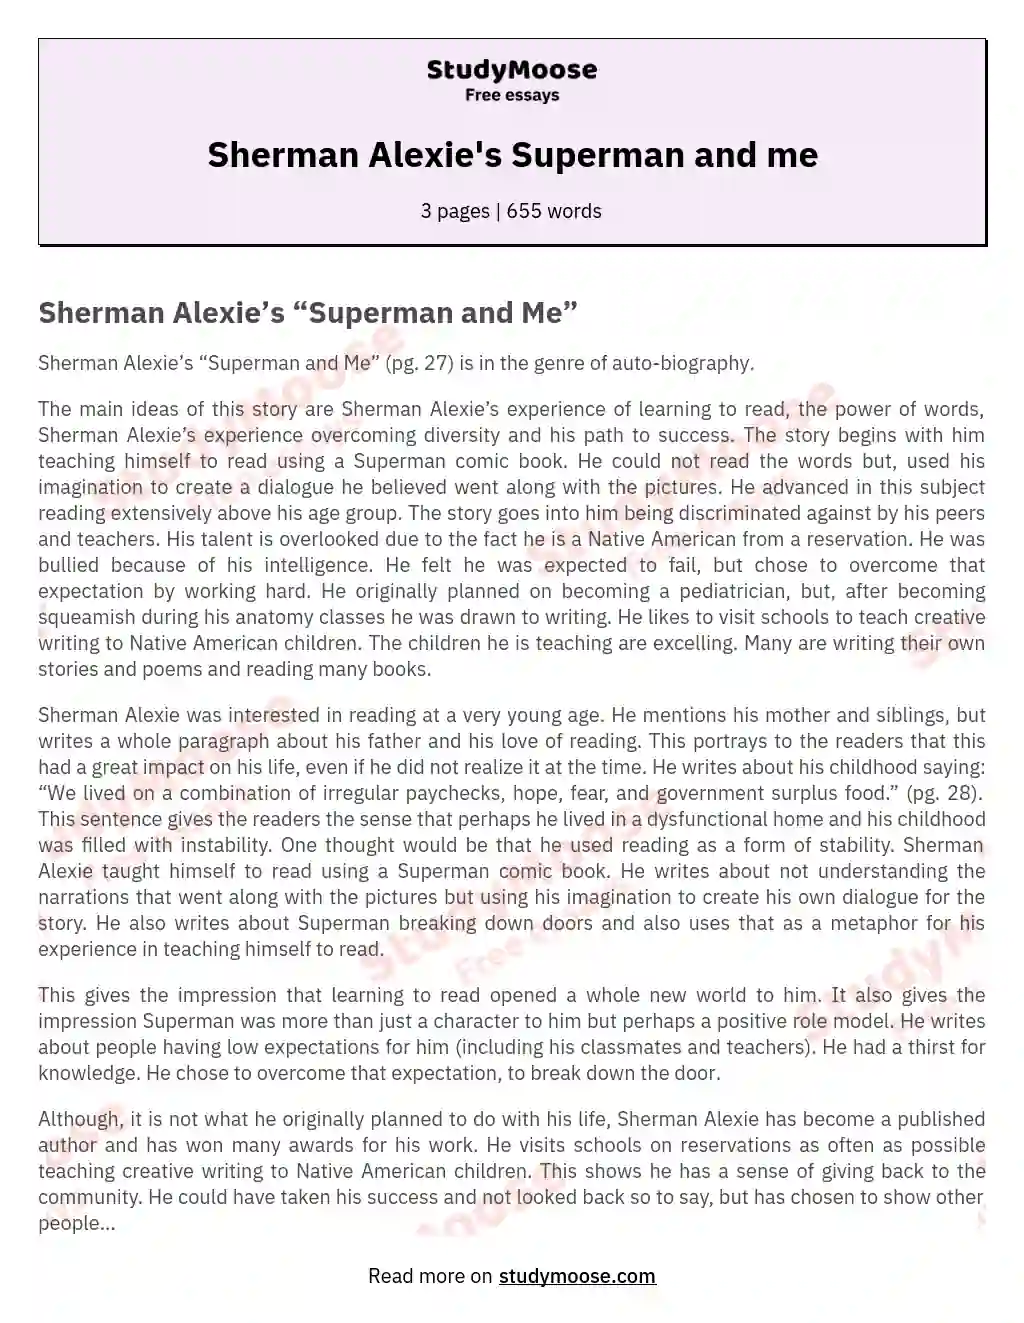 Sherman Alexie's Superman and me essay